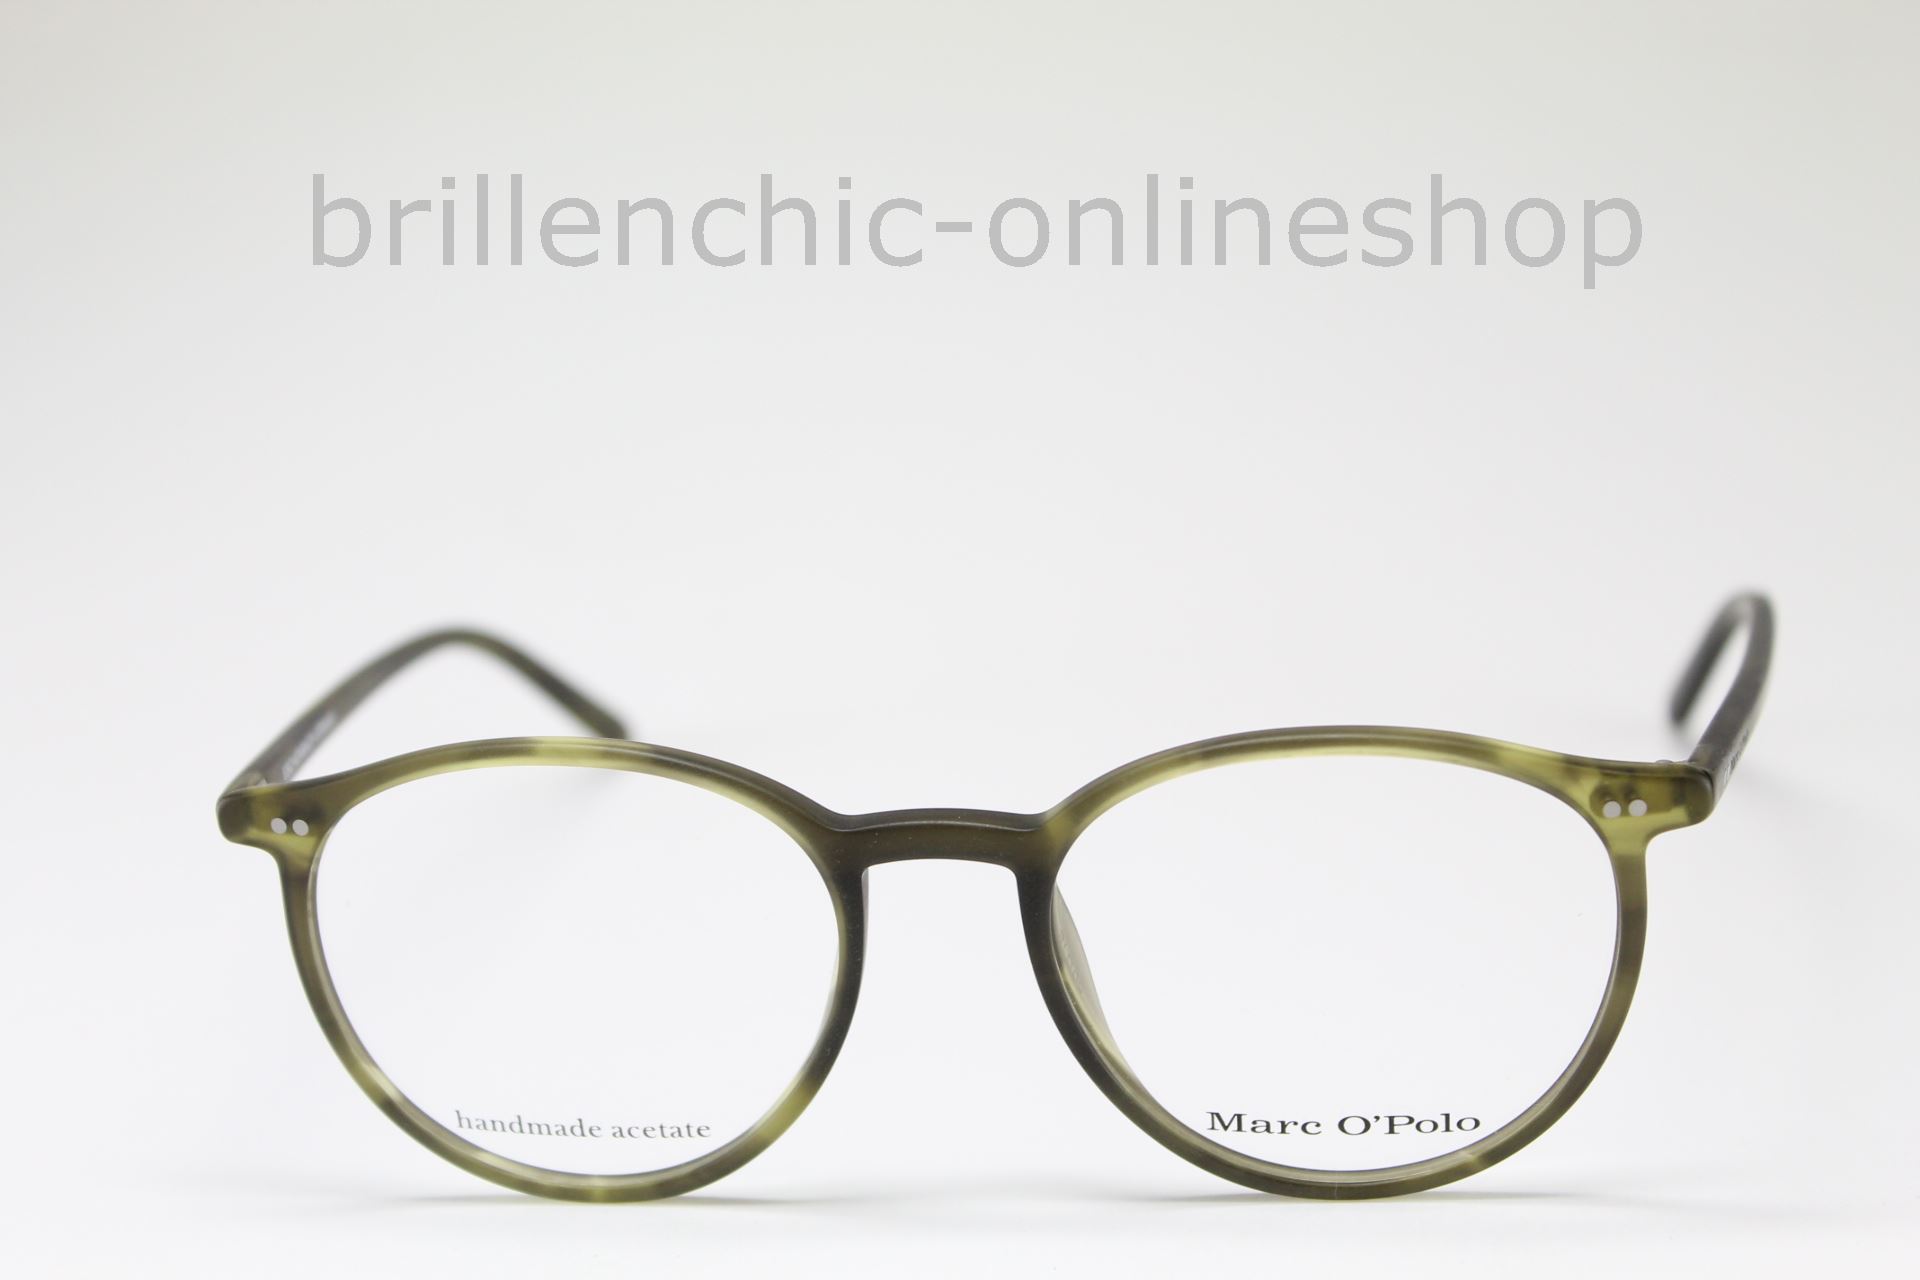 Brillenchic-onlineshop Berlin MARC O'POLO 503084 40 "NEW"